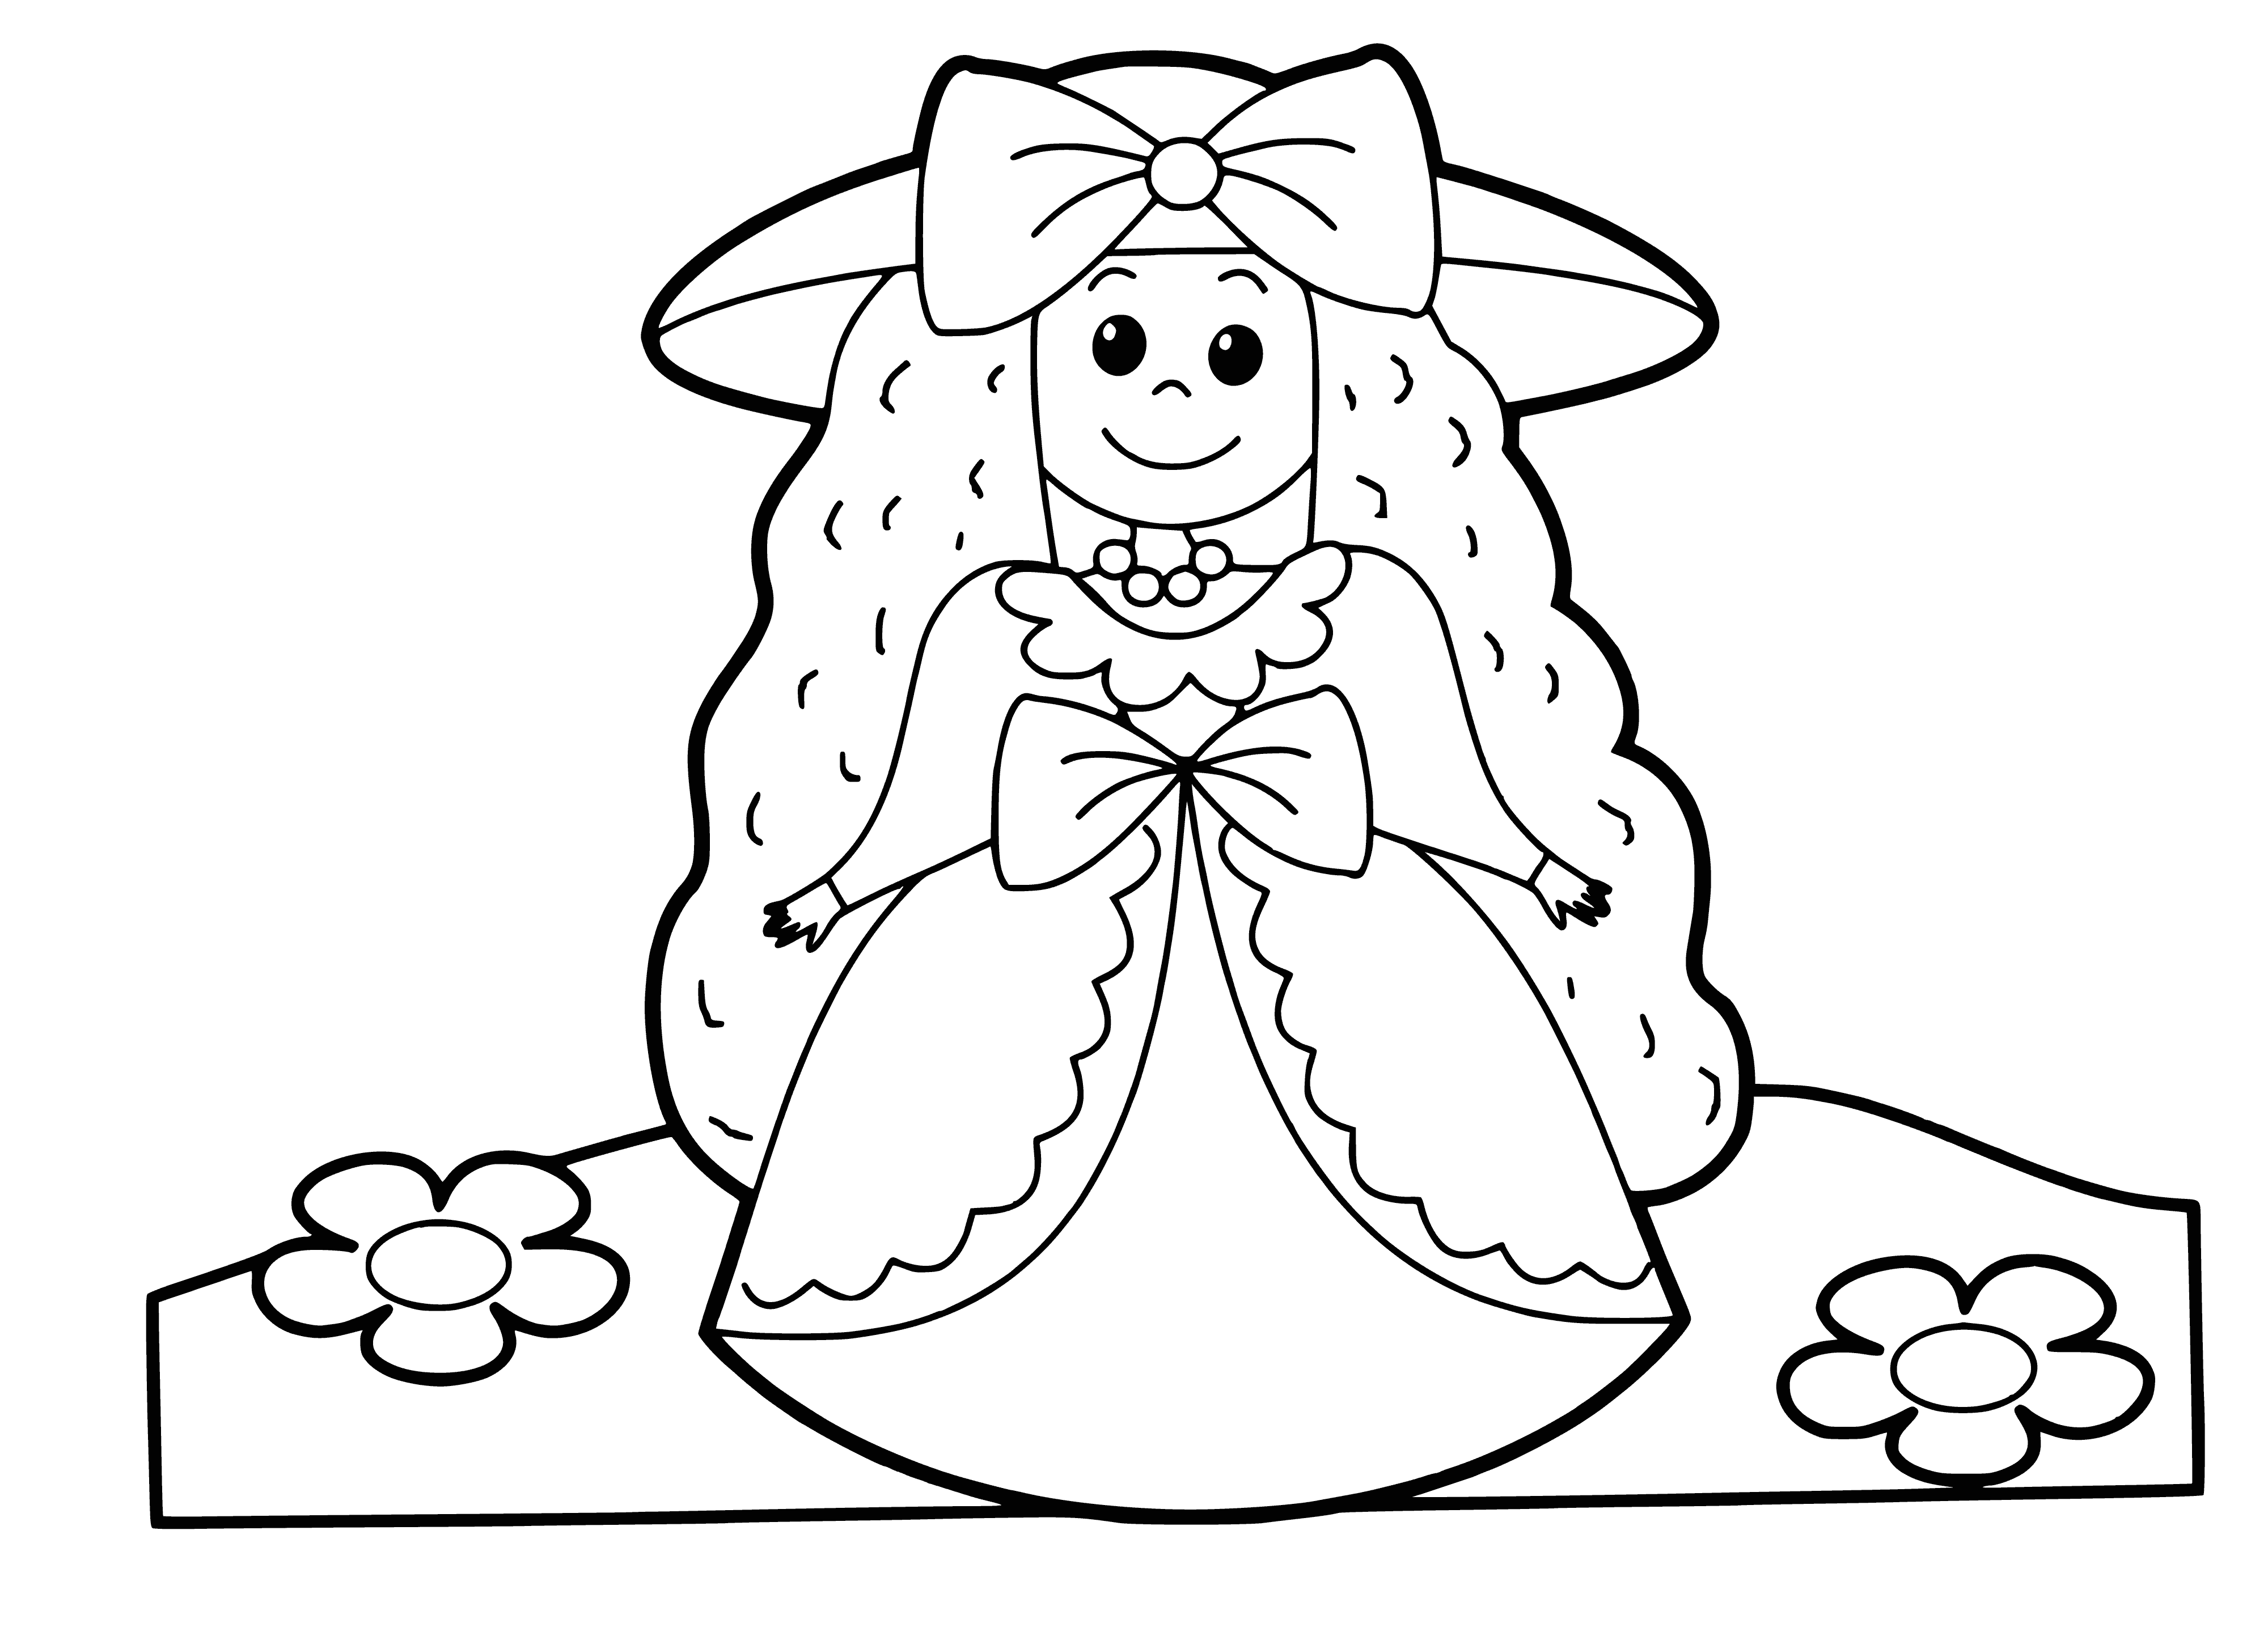 coloring page: Young girl sits in front of a mirror holding a hat, hair pulled back, wearing white shirt & black skirt.